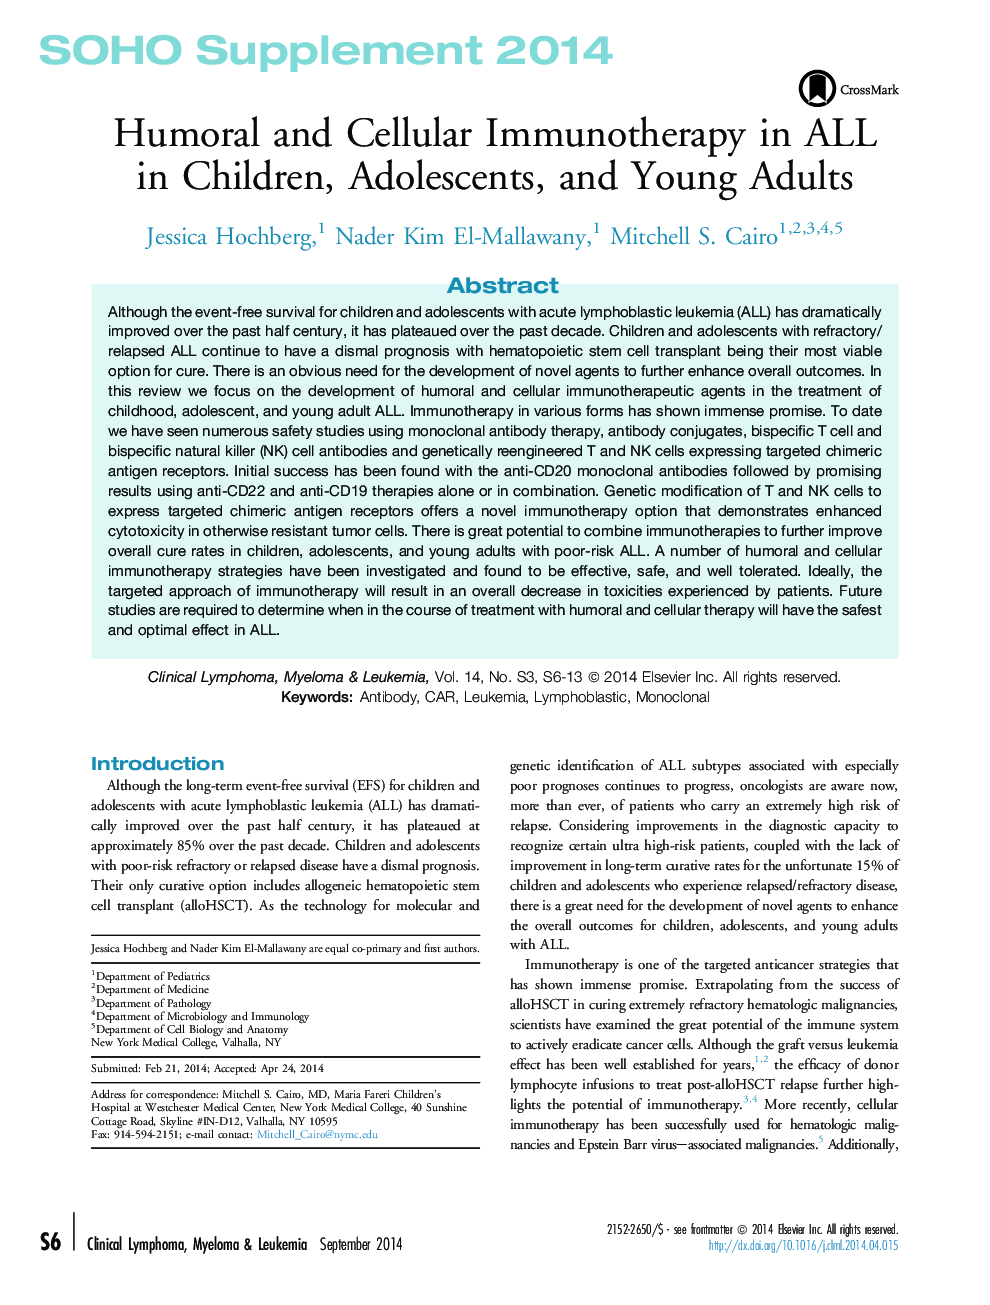 Humoral and Cellular Immunotherapy in ALL in Children, Adolescents, and Young Adults 